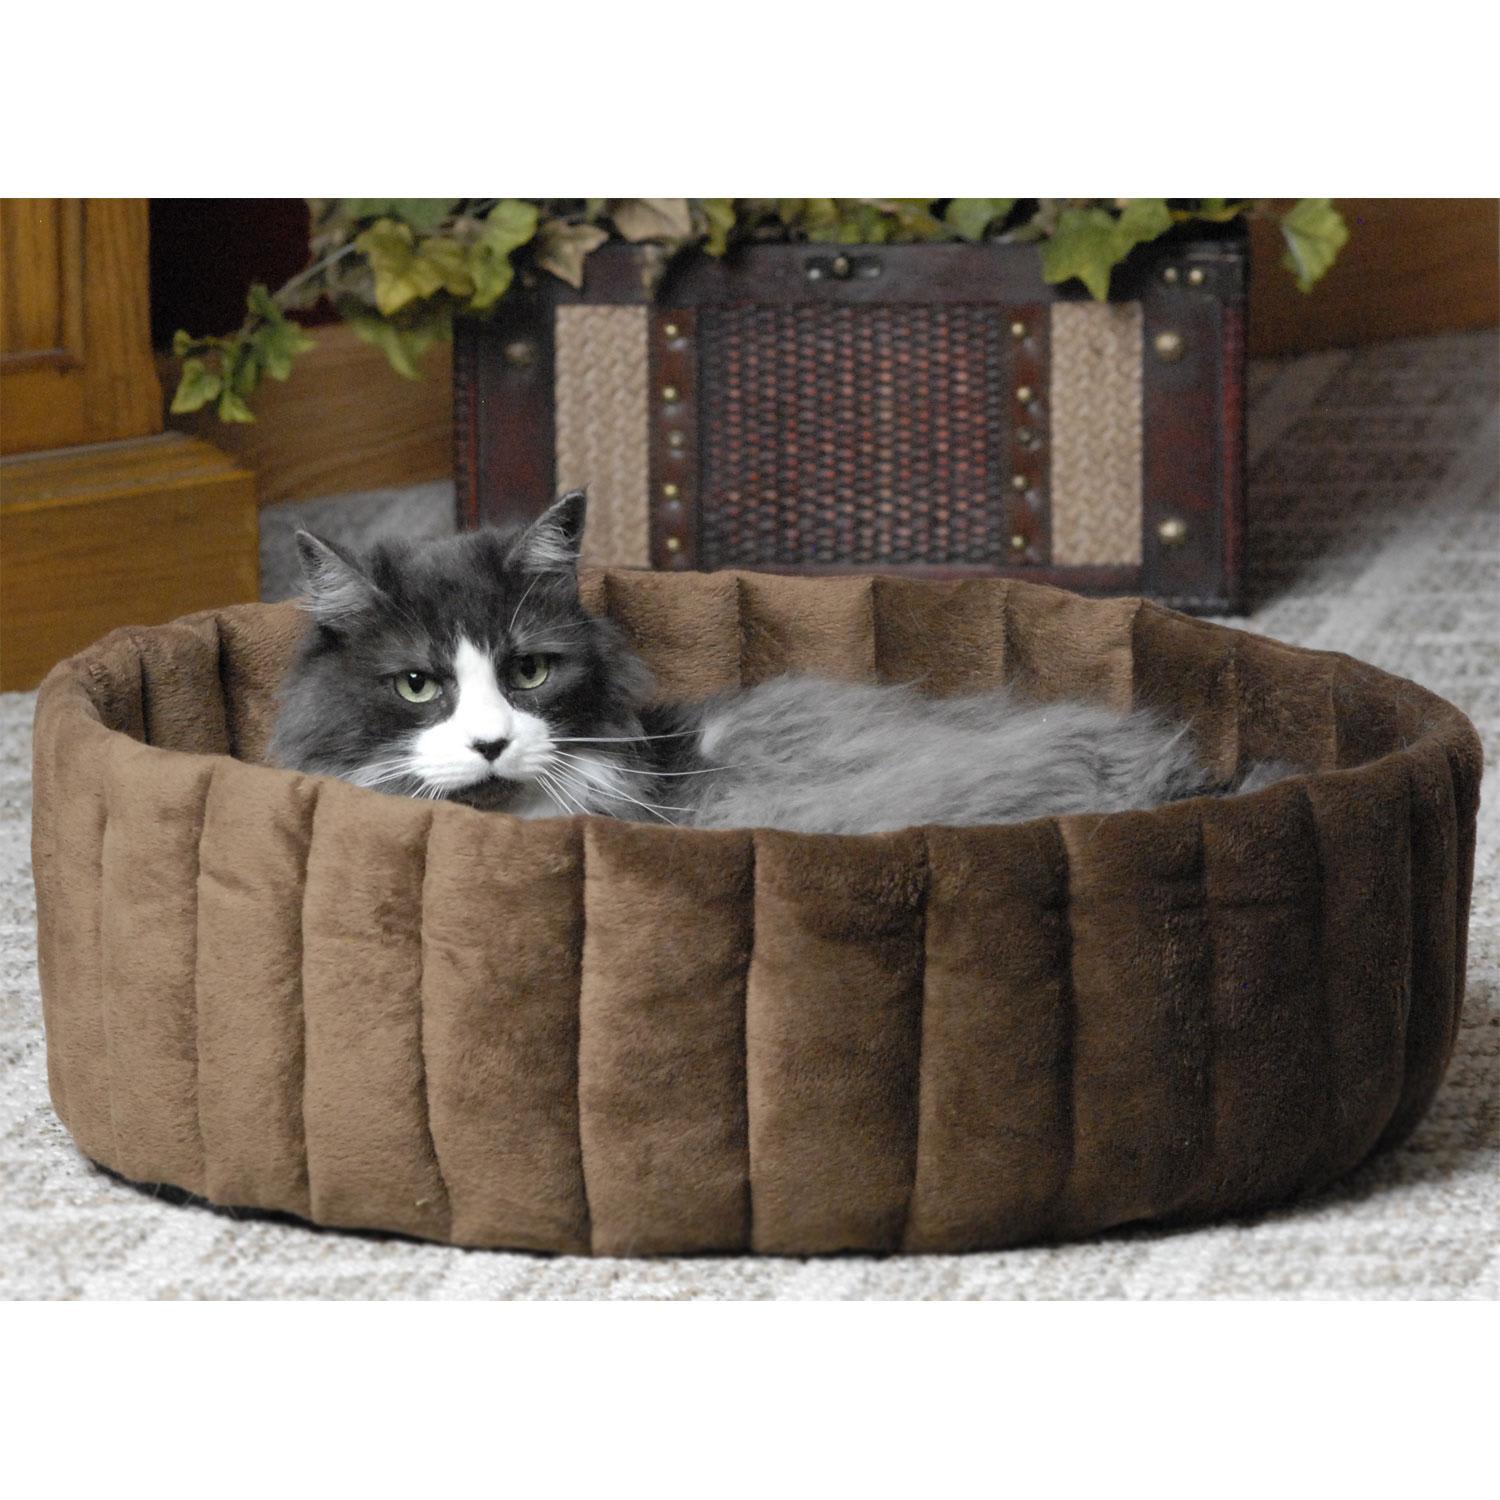 Photos - Bed & Furniture K&H Kitty Cup Tan & Mocha Cat Bed, 20" L x 20" W, Large, Brown / Tan 1 